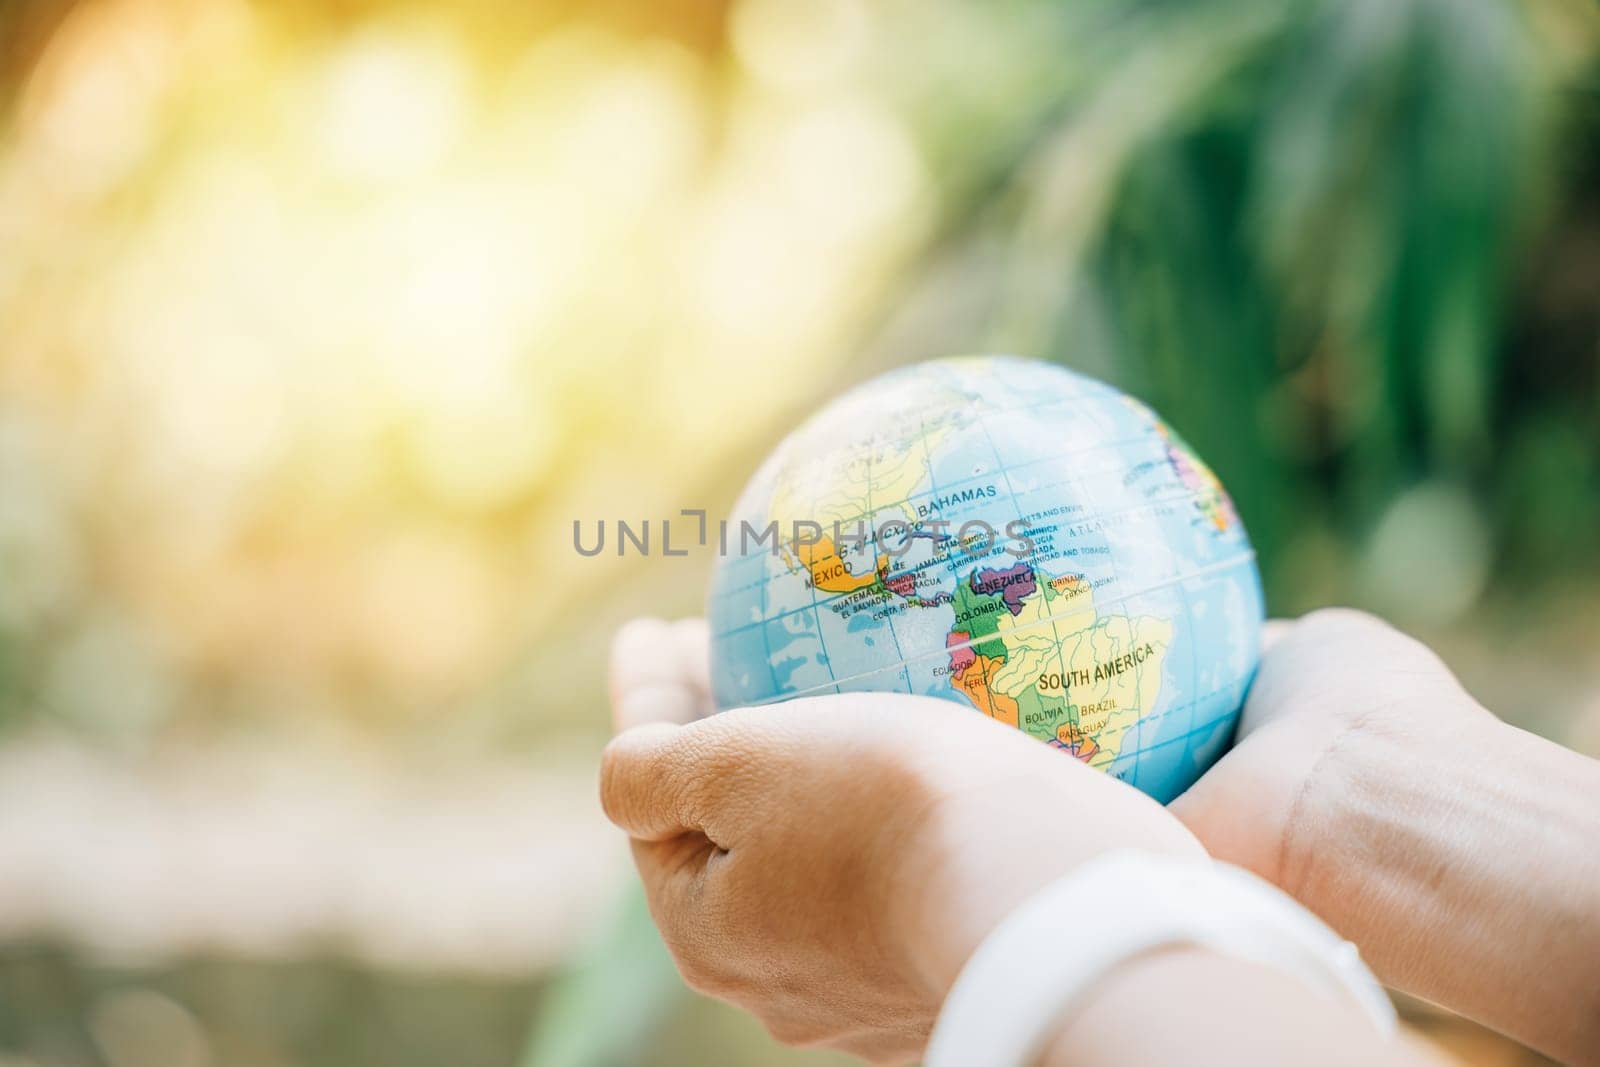 On Environment and Earth Day, hold the Green Planet to signify Earth's preservation. This concept highlights responsibility, wisdom, and global support for our natural world. by Sorapop